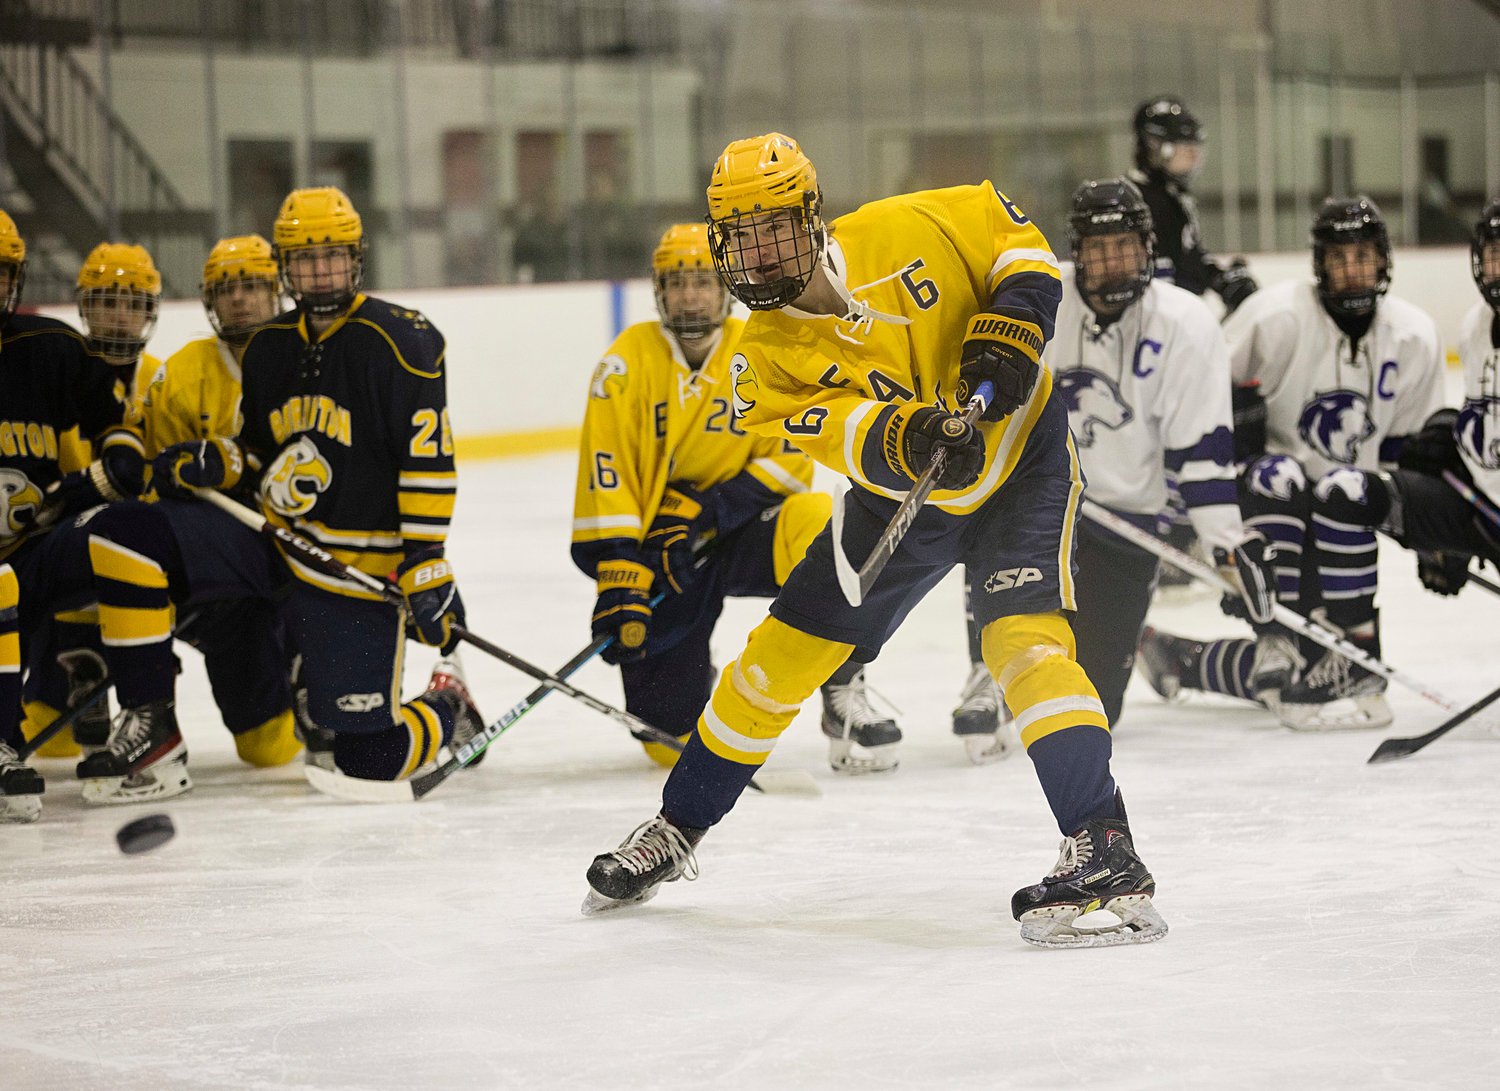 Adam Gorman shoots toward a target during the first-ever J.P. Medeiros Jr. Hockey Competition, Saturday.